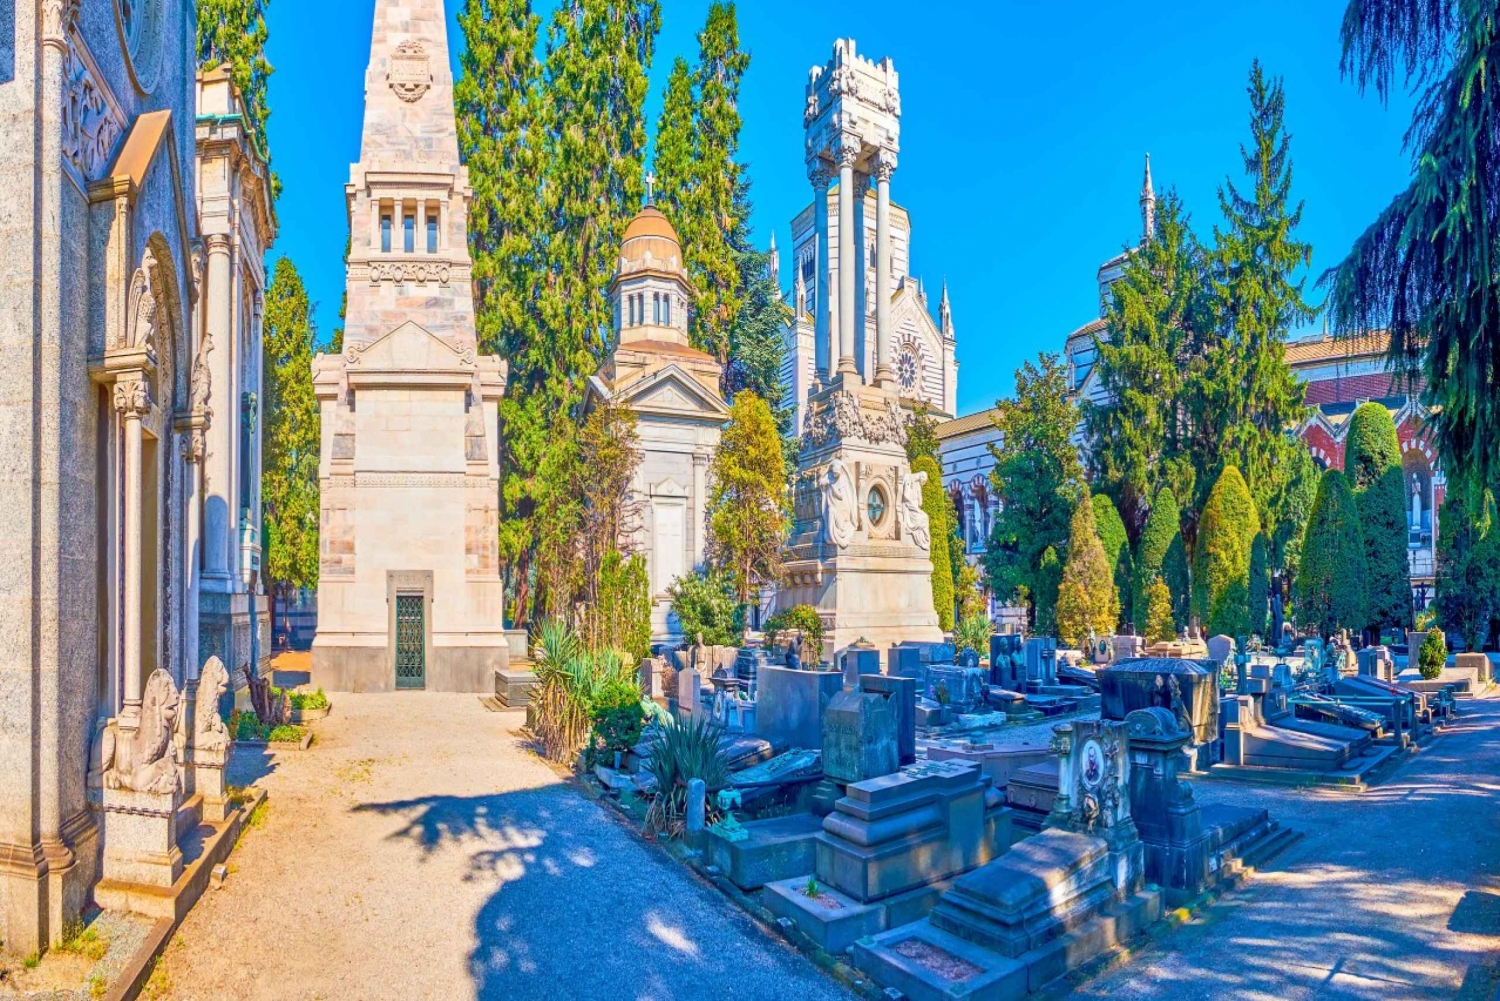 Private Guided Tour of the Cimitero Monumentale in Milan